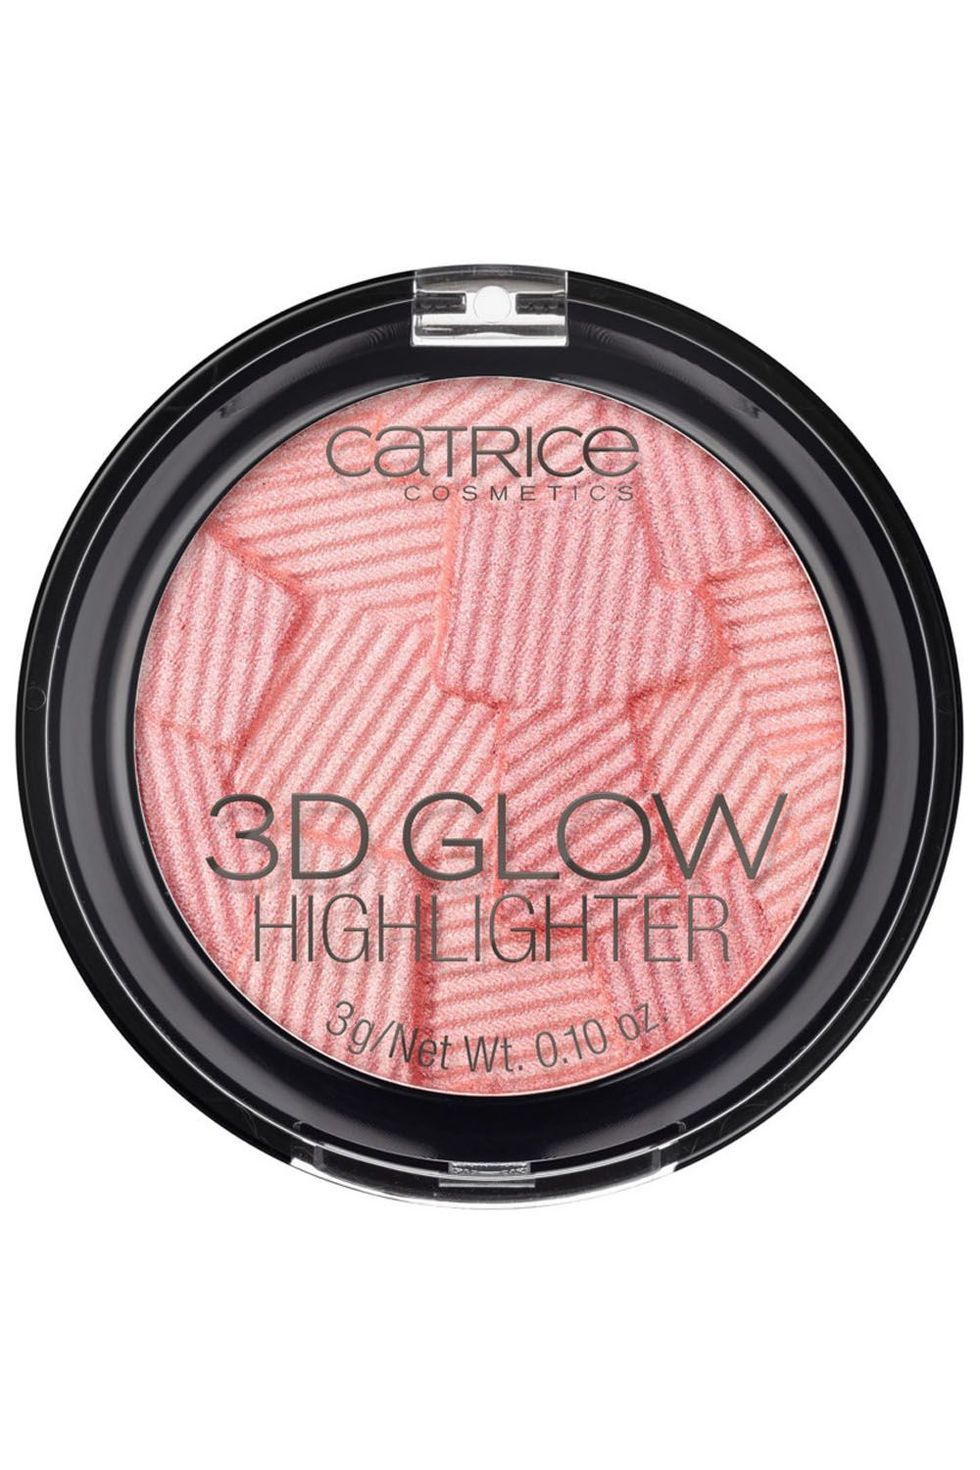 Catrice 3D Glow Highlighter